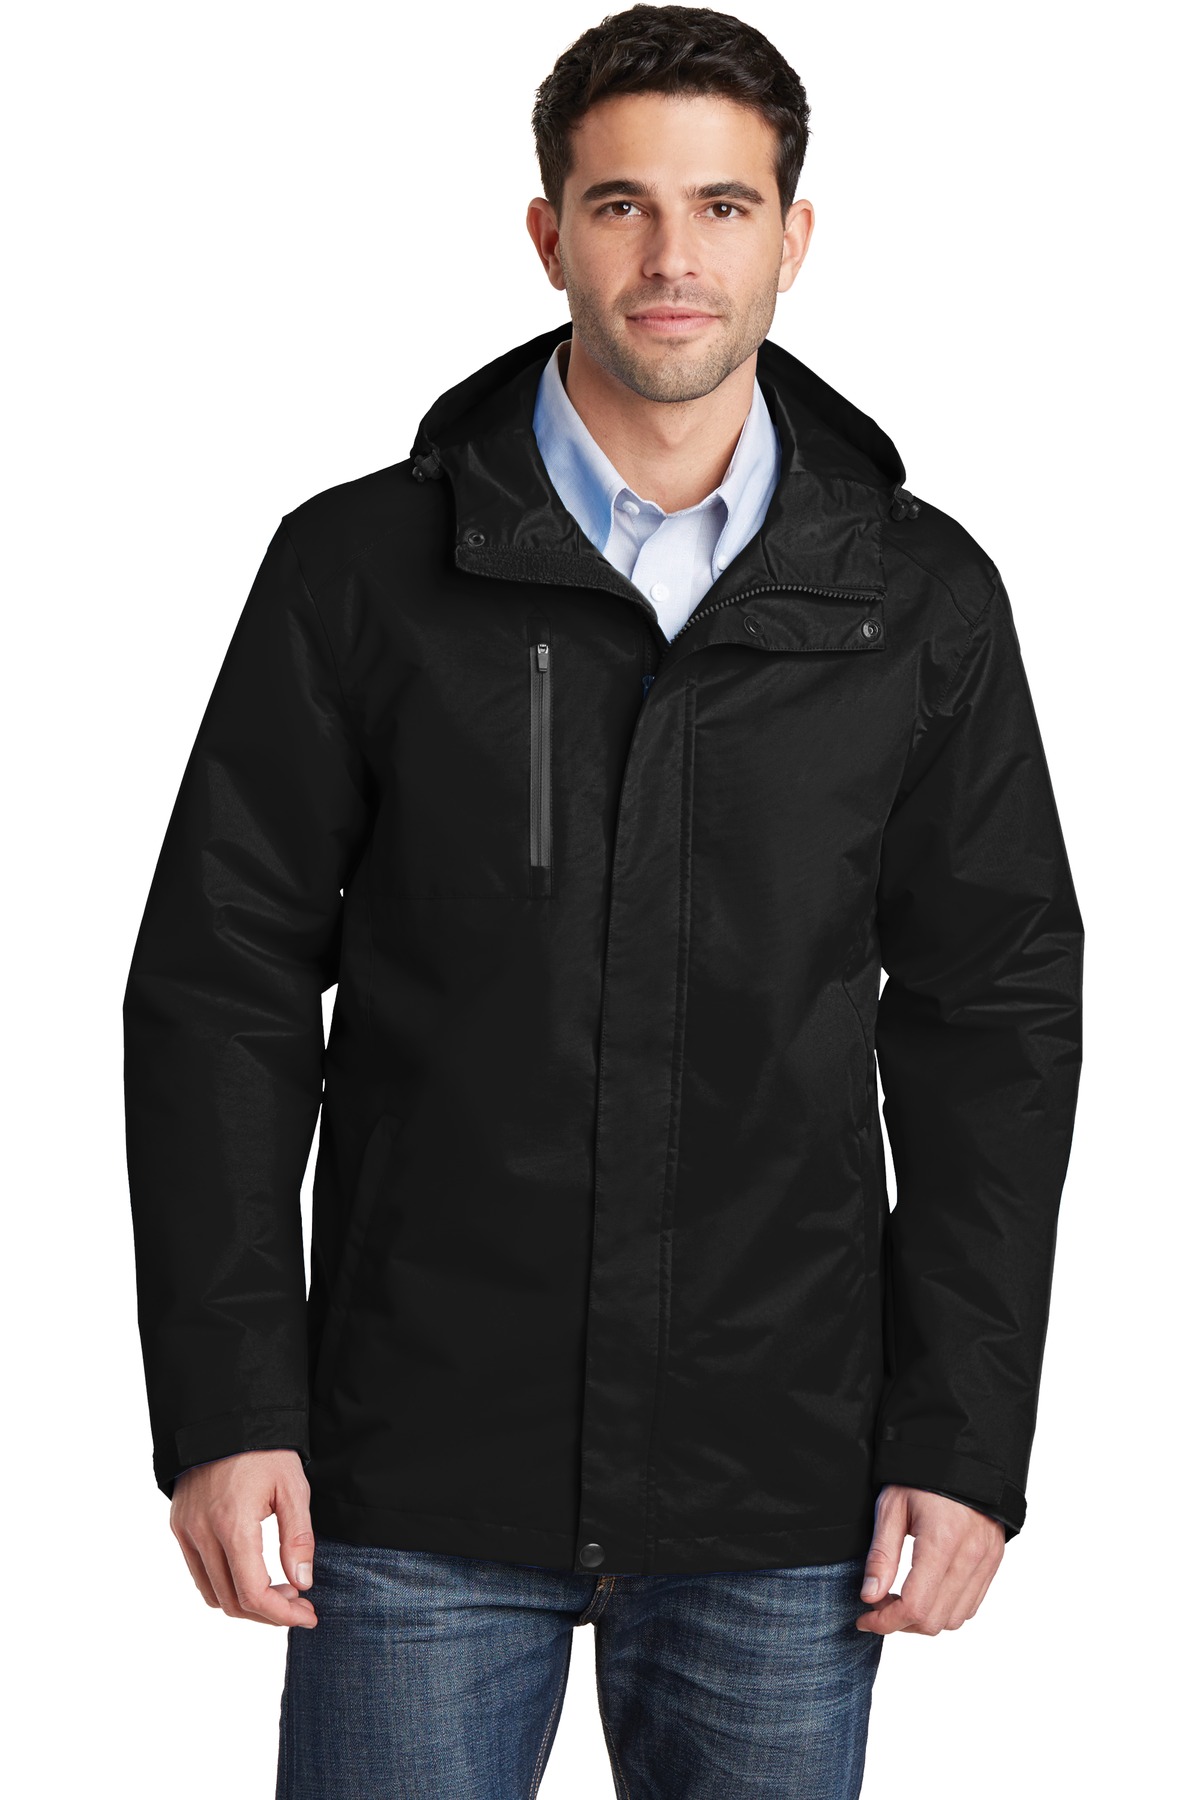 Port Authority All-Conditions Jacket - J331